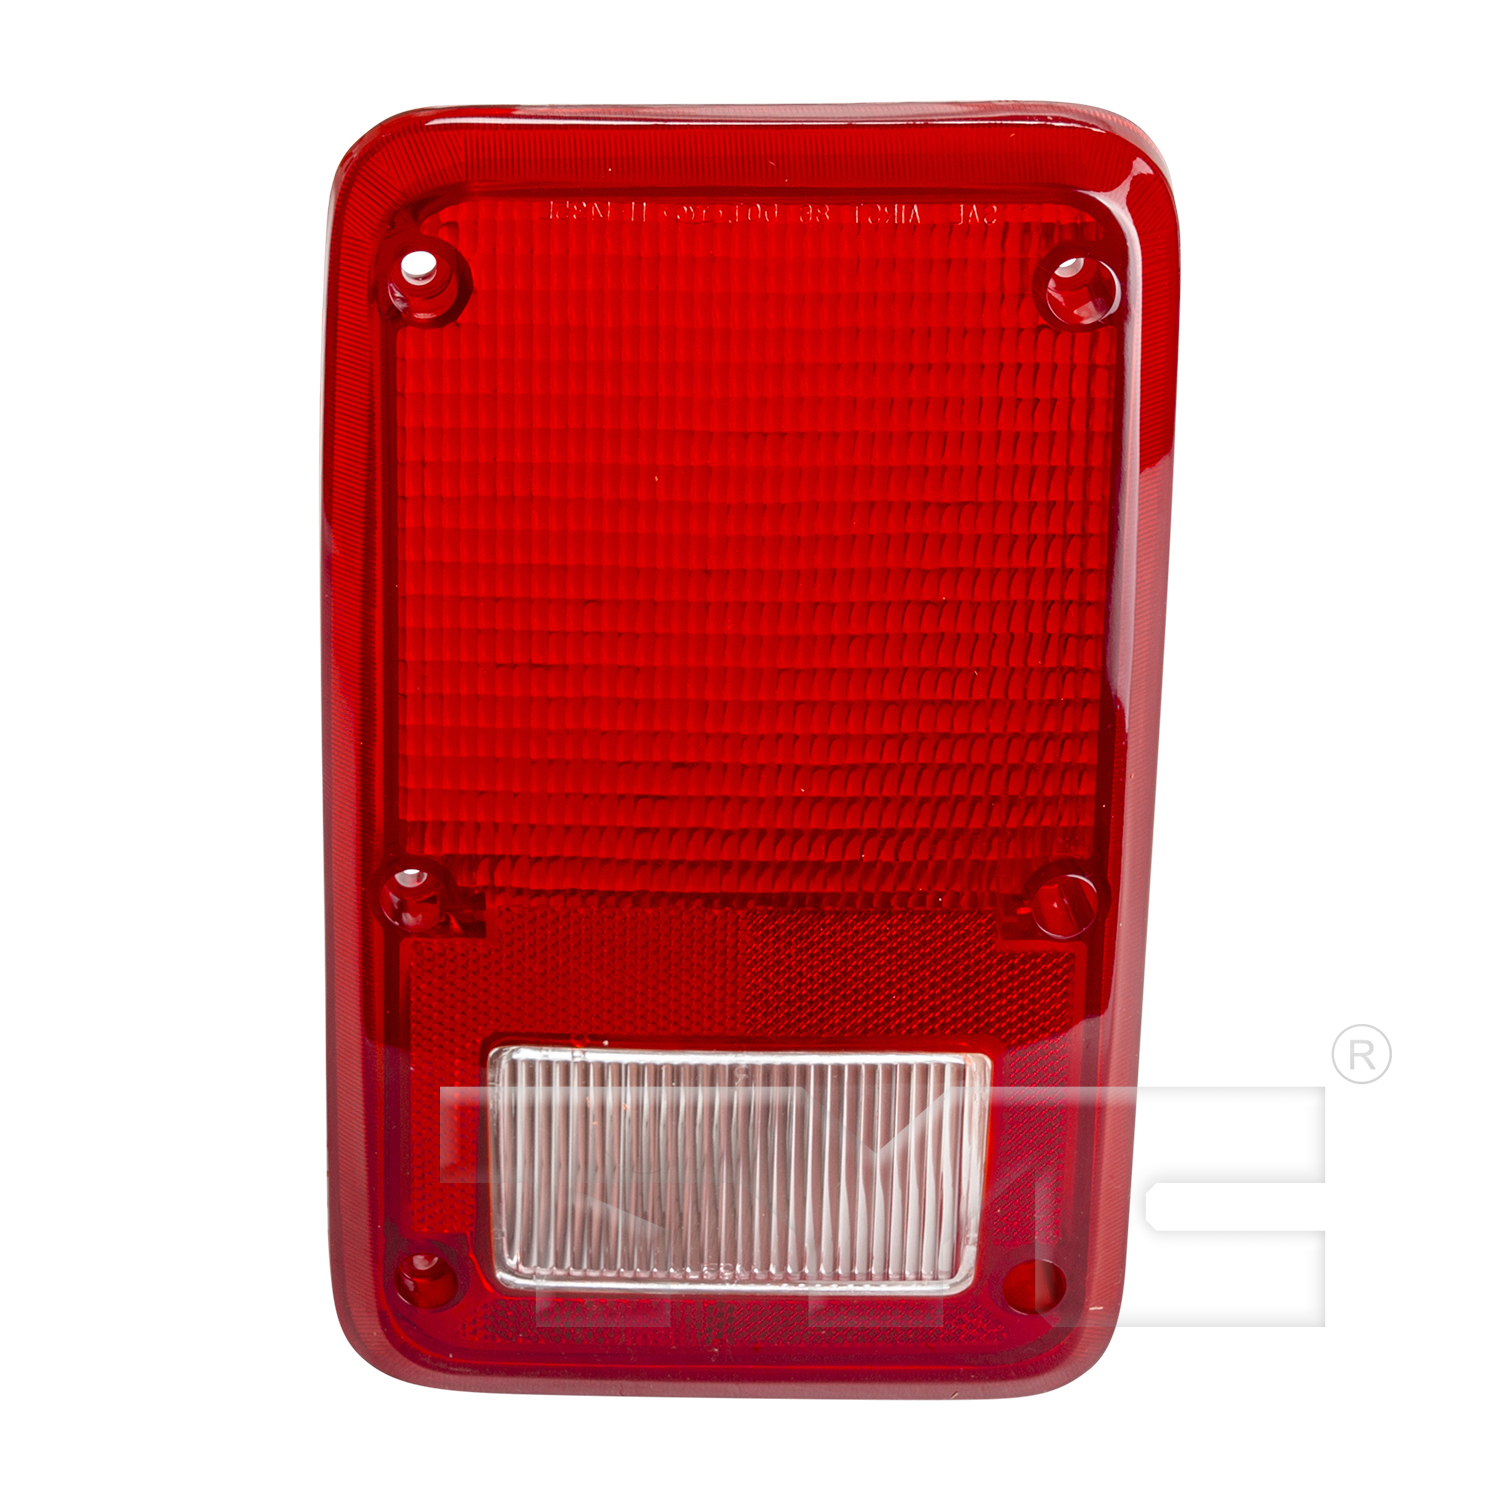 Aftermarket TAILLIGHTS for PLYMOUTH - PB200, PB200,78-80,LT Taillamp lens